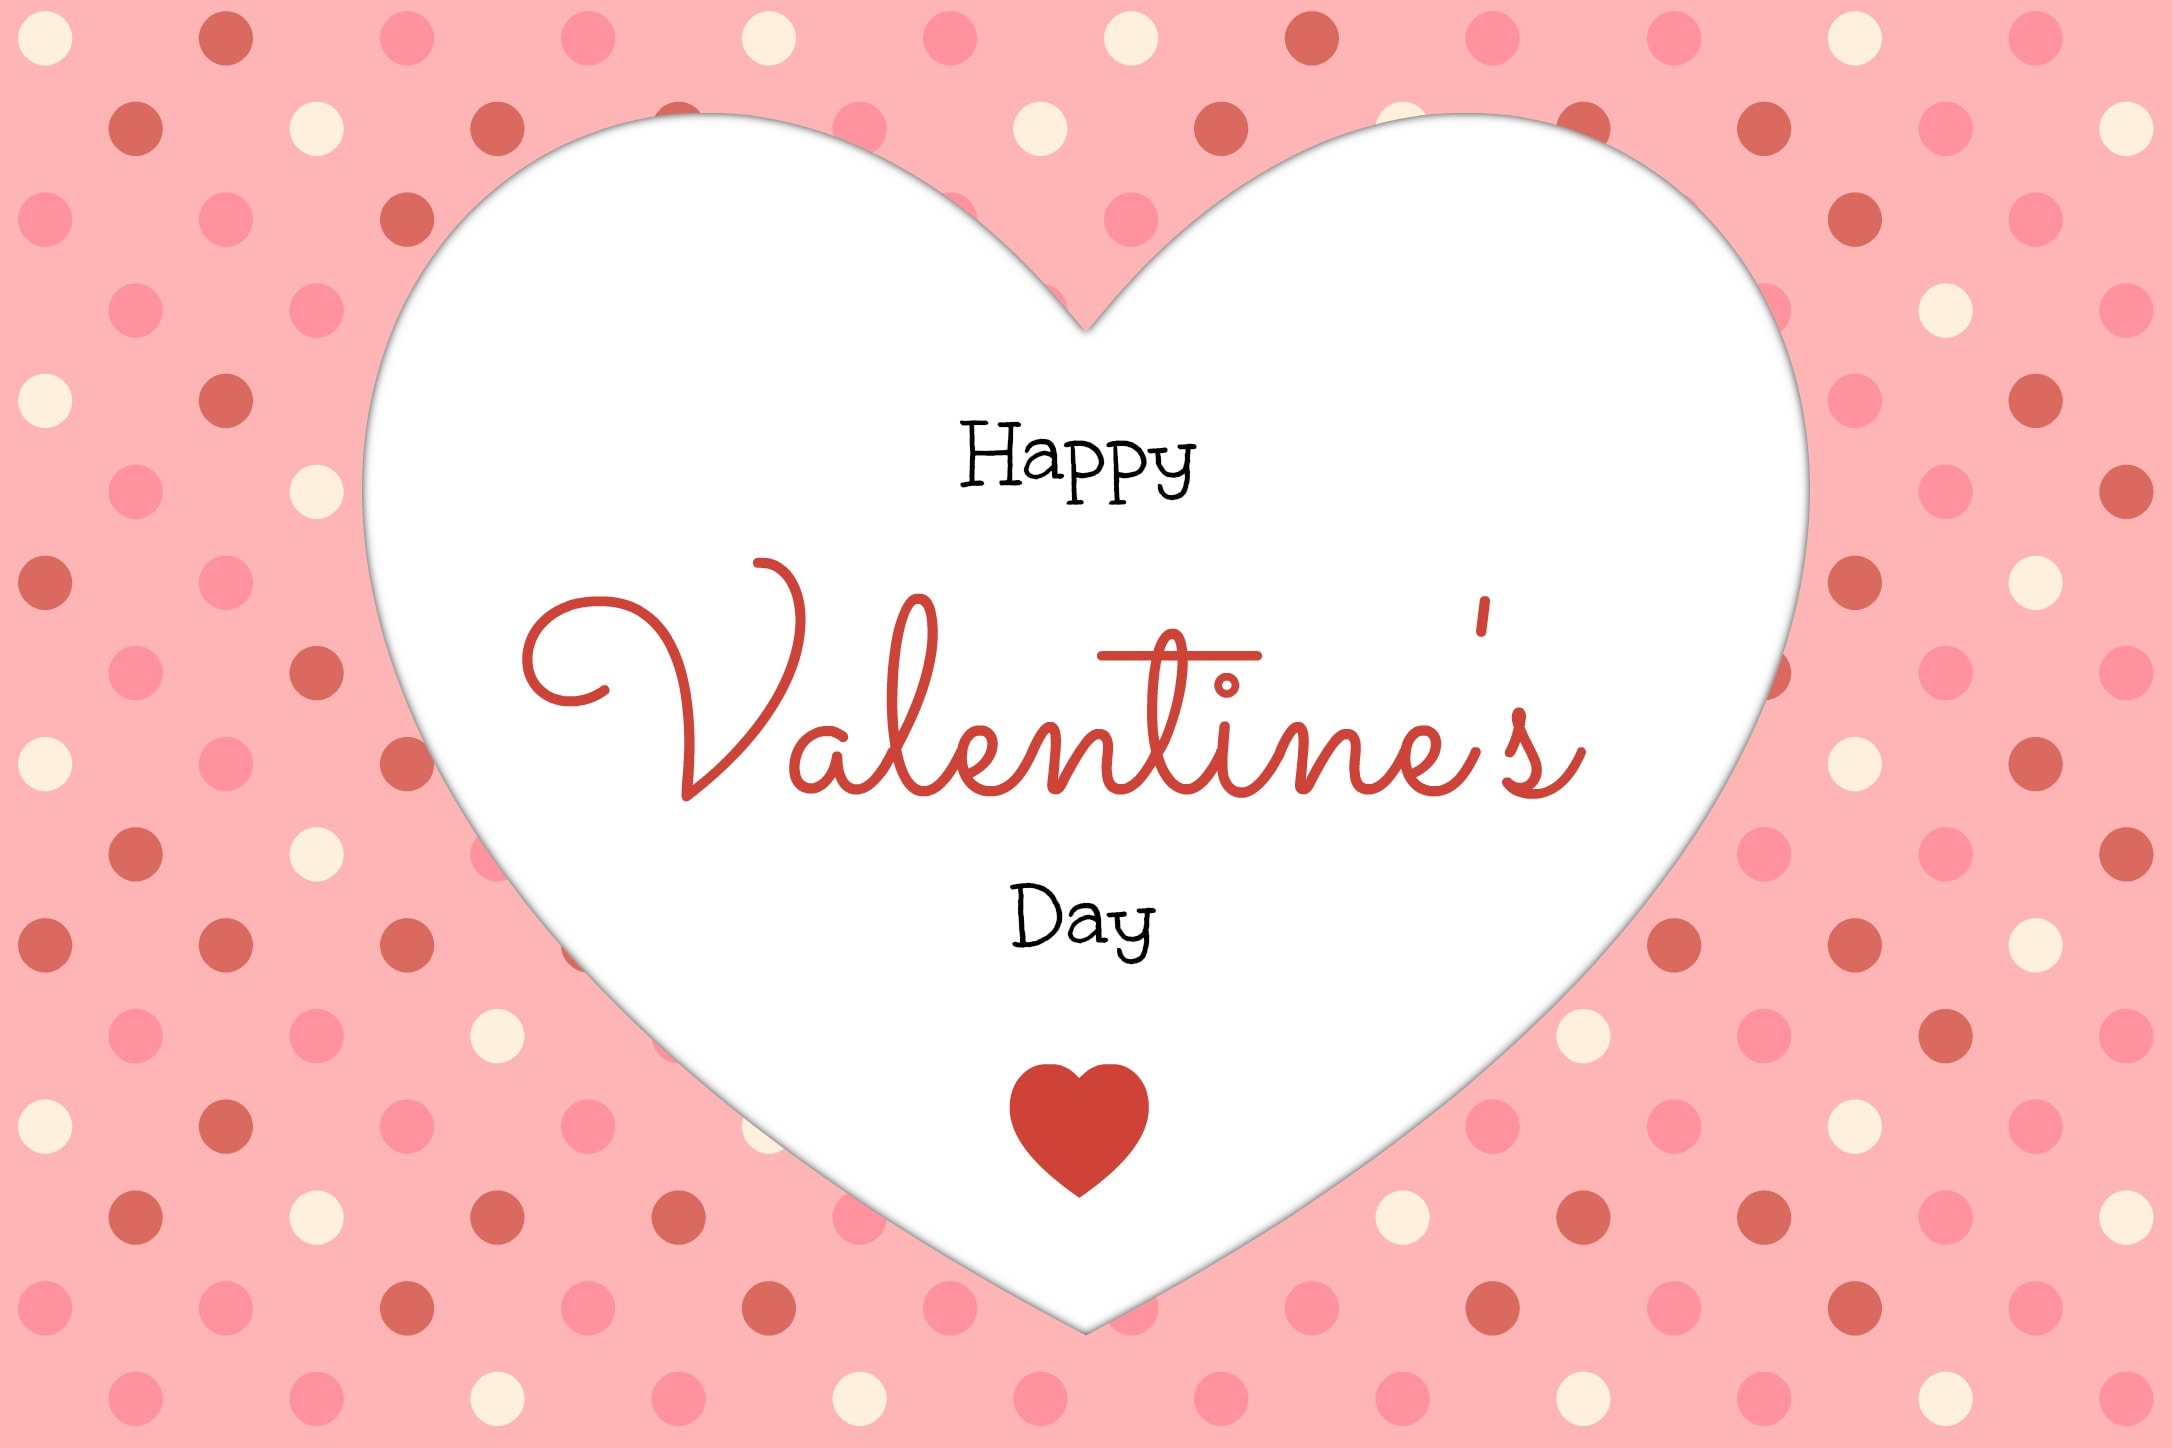 Happy Valentine's Day Images for Friends